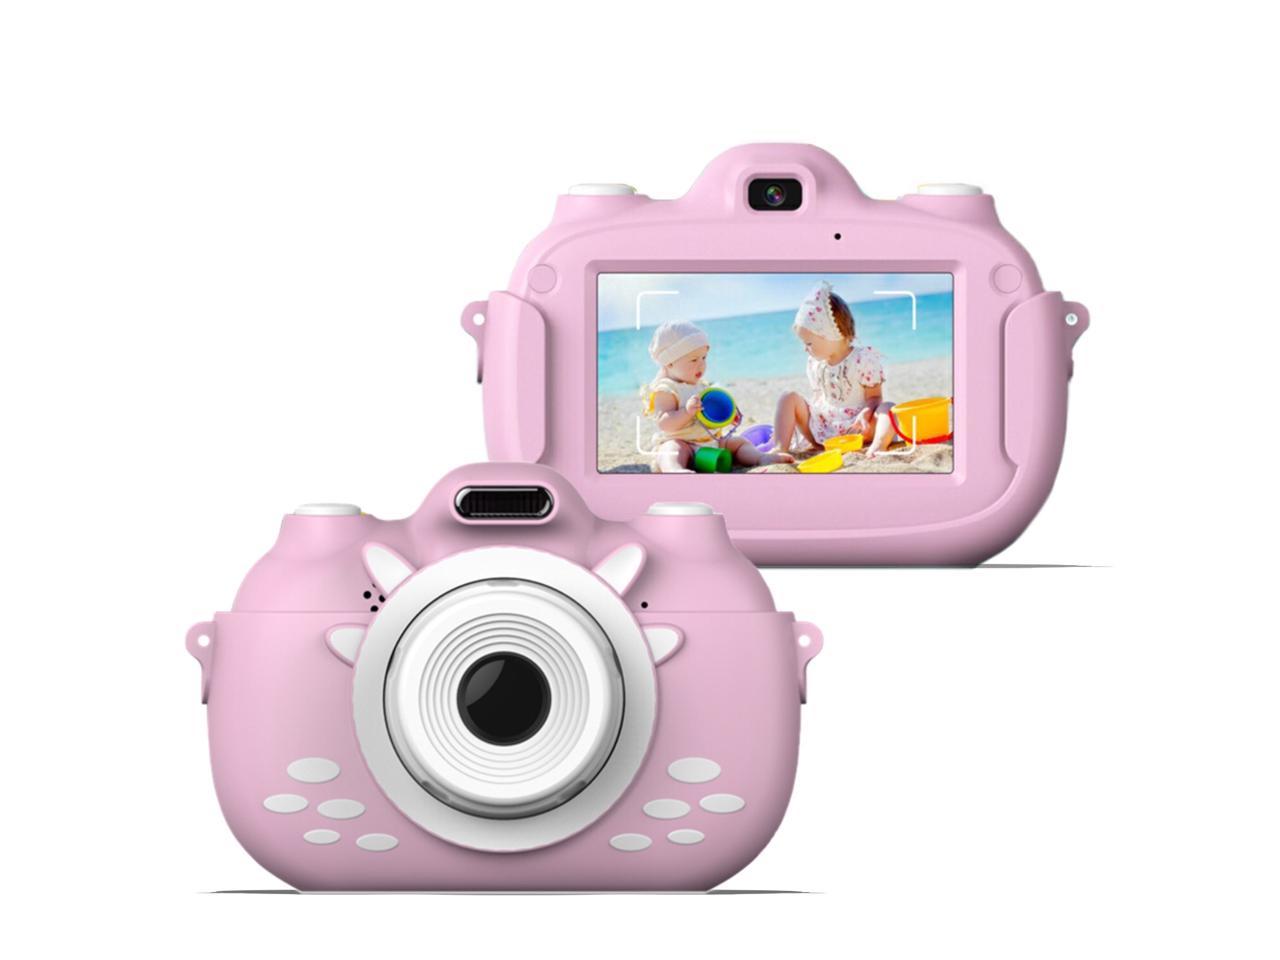 LINGDANG Digital Camera for Kids 1080P FHD Kids Digital Video Camera with 2 Inch IPS Screen and 16GB SD Card Digital Cameras Toys for 3-10 Years Boys Girls Gift 